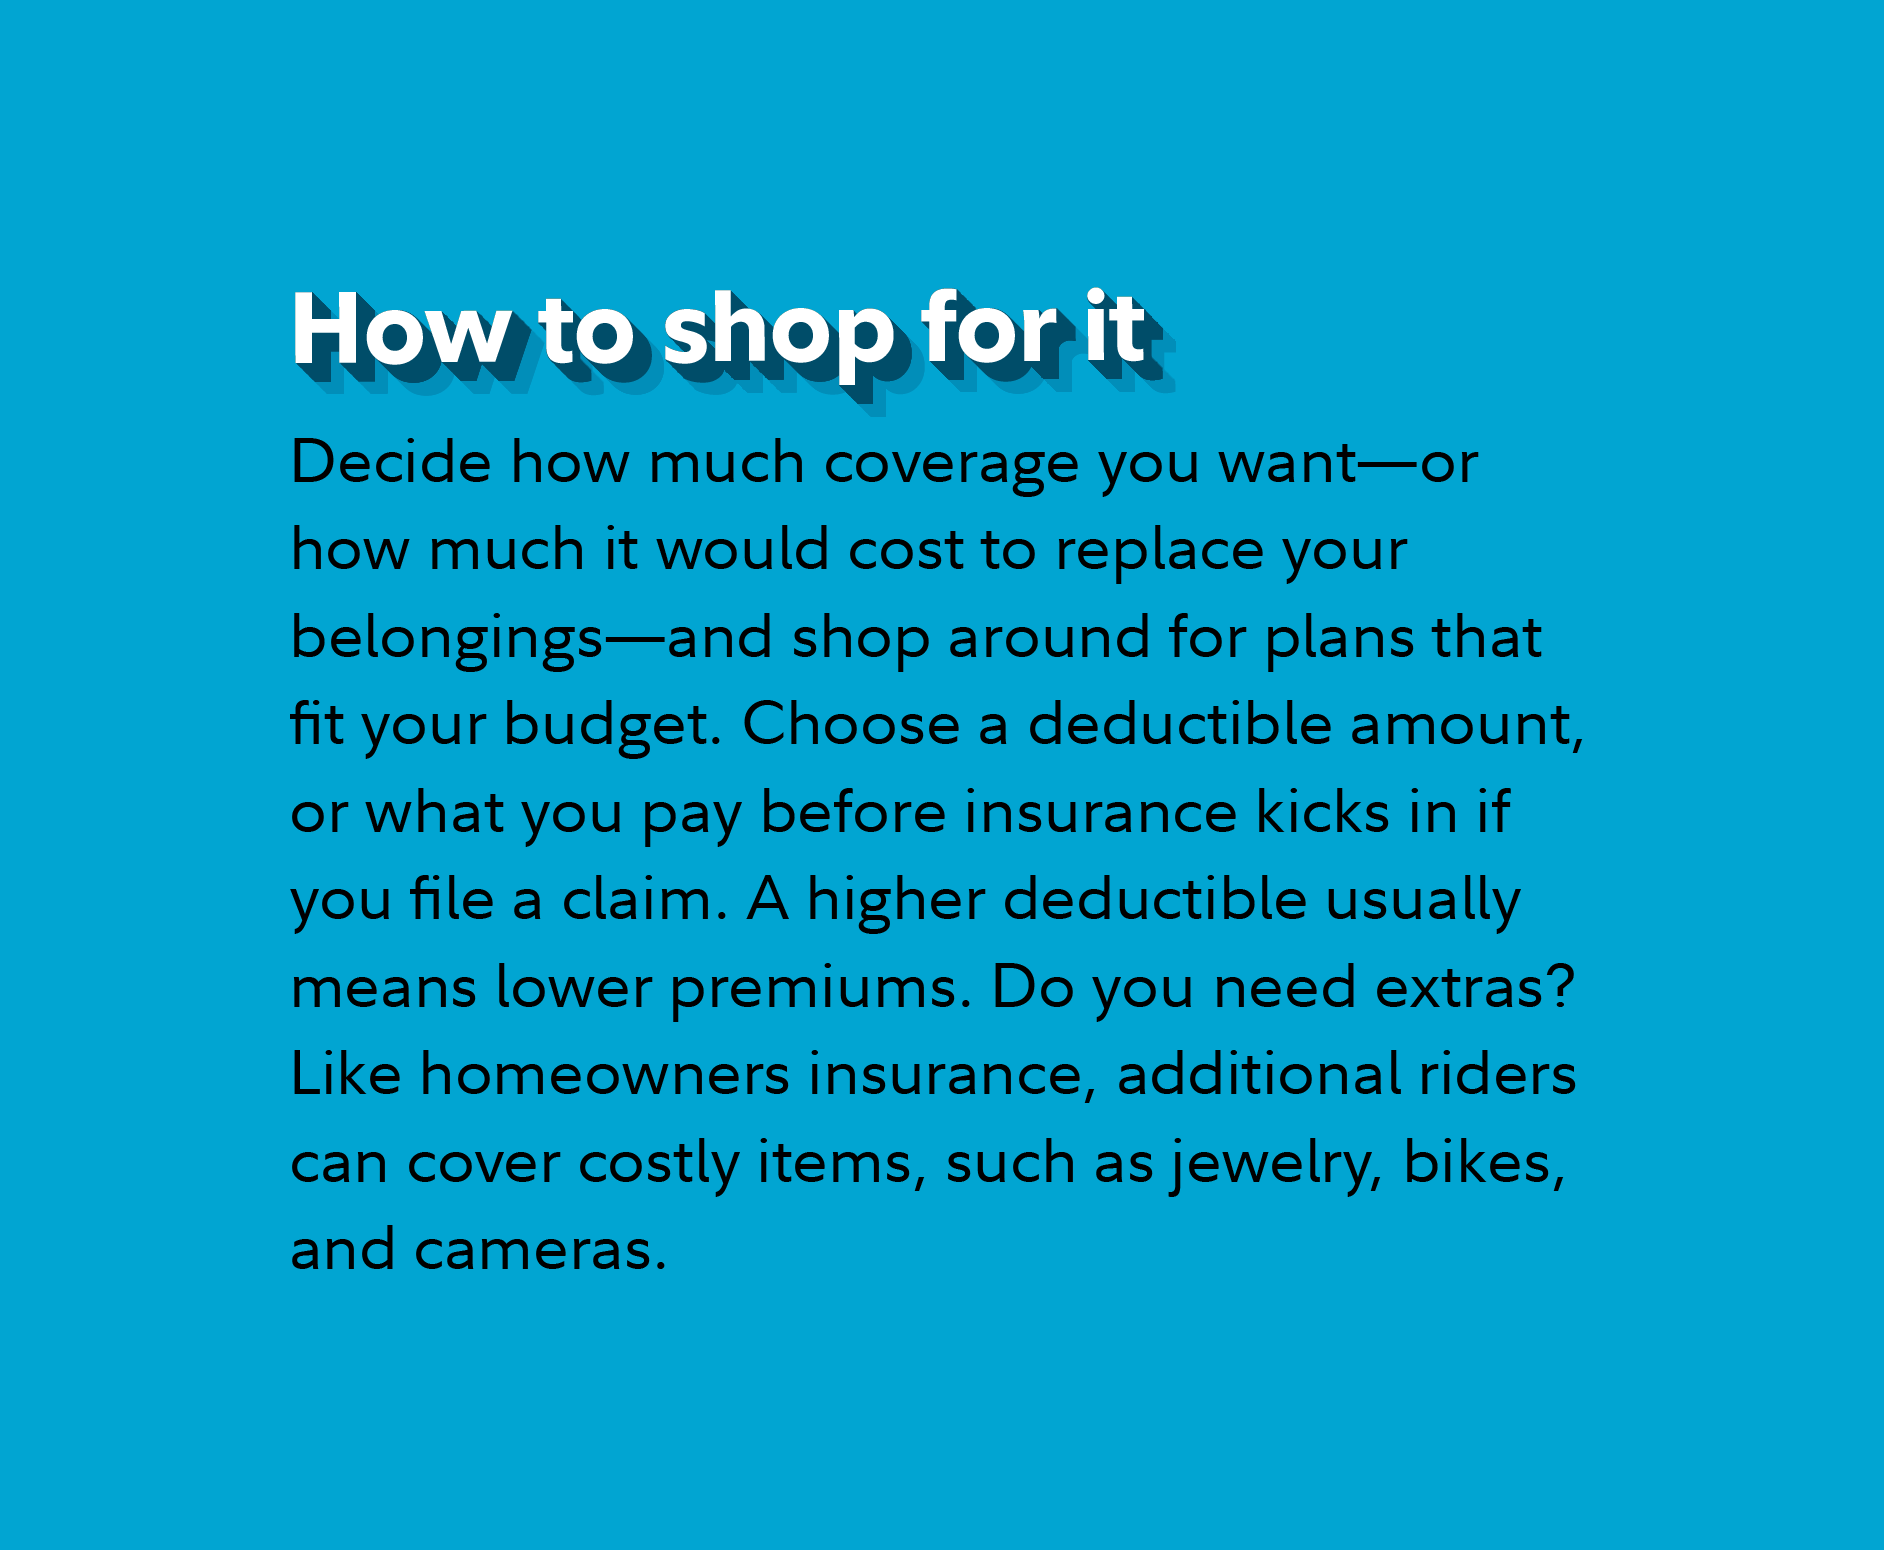 How to shop for it Decide how much coverage you want—or how much it would cost to replace your belongings—and shop around for plans that fit your budget. Choose a deductible amount, or what you pay before insurance kicks in if you file a claim. A higher deductible usually means lower premiums. Do you need extras? Like homeowners insurance, additional riders can cover costly items, such as jewelry, bikes, and cameras. 